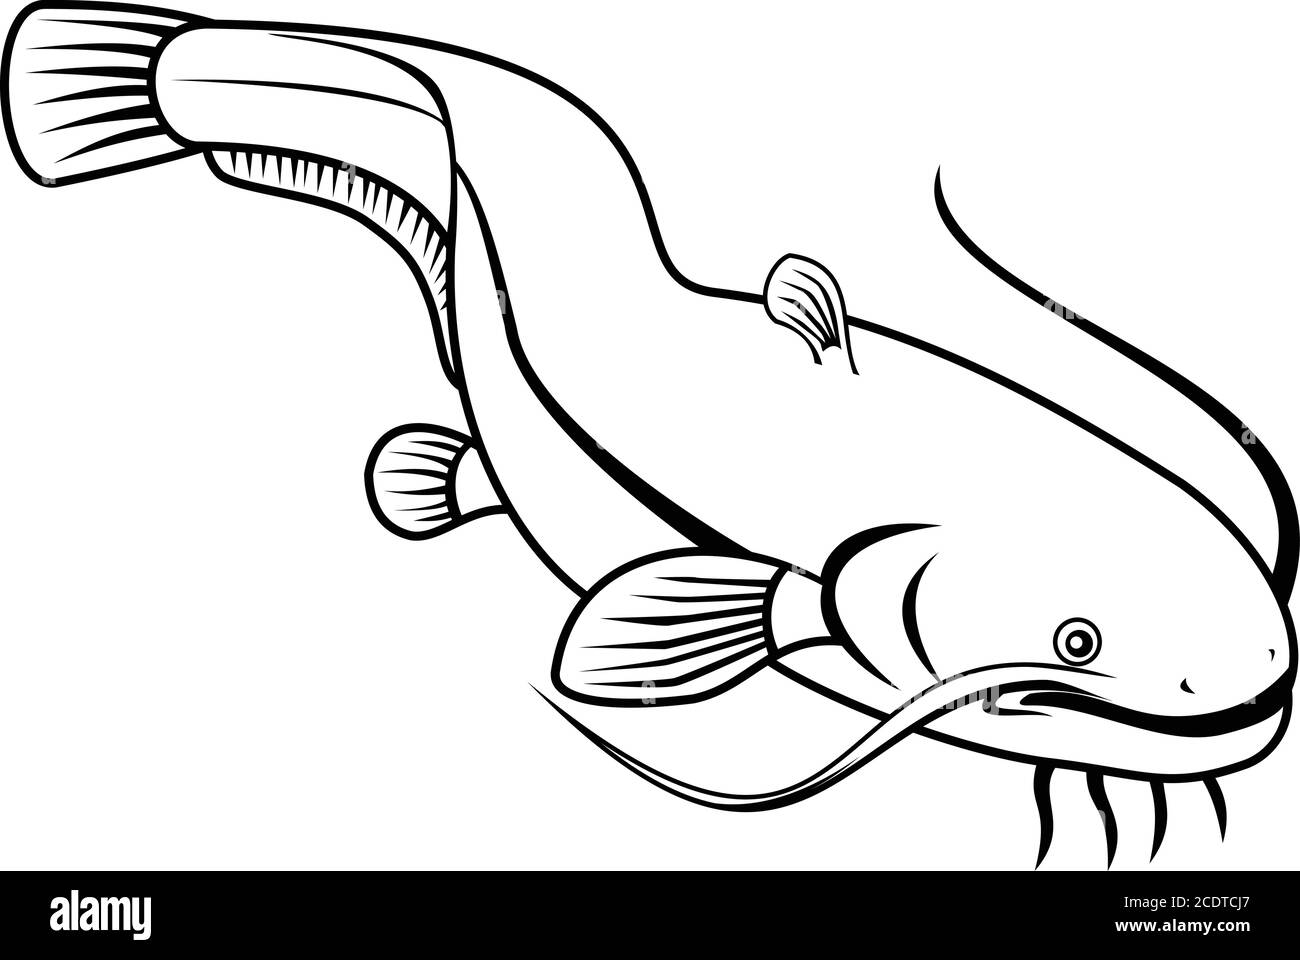 Retro style illustration of wels catfish also called sheatfish, a species of large catfish native to wide areas of central, southern and eastern Europ Stock Vector